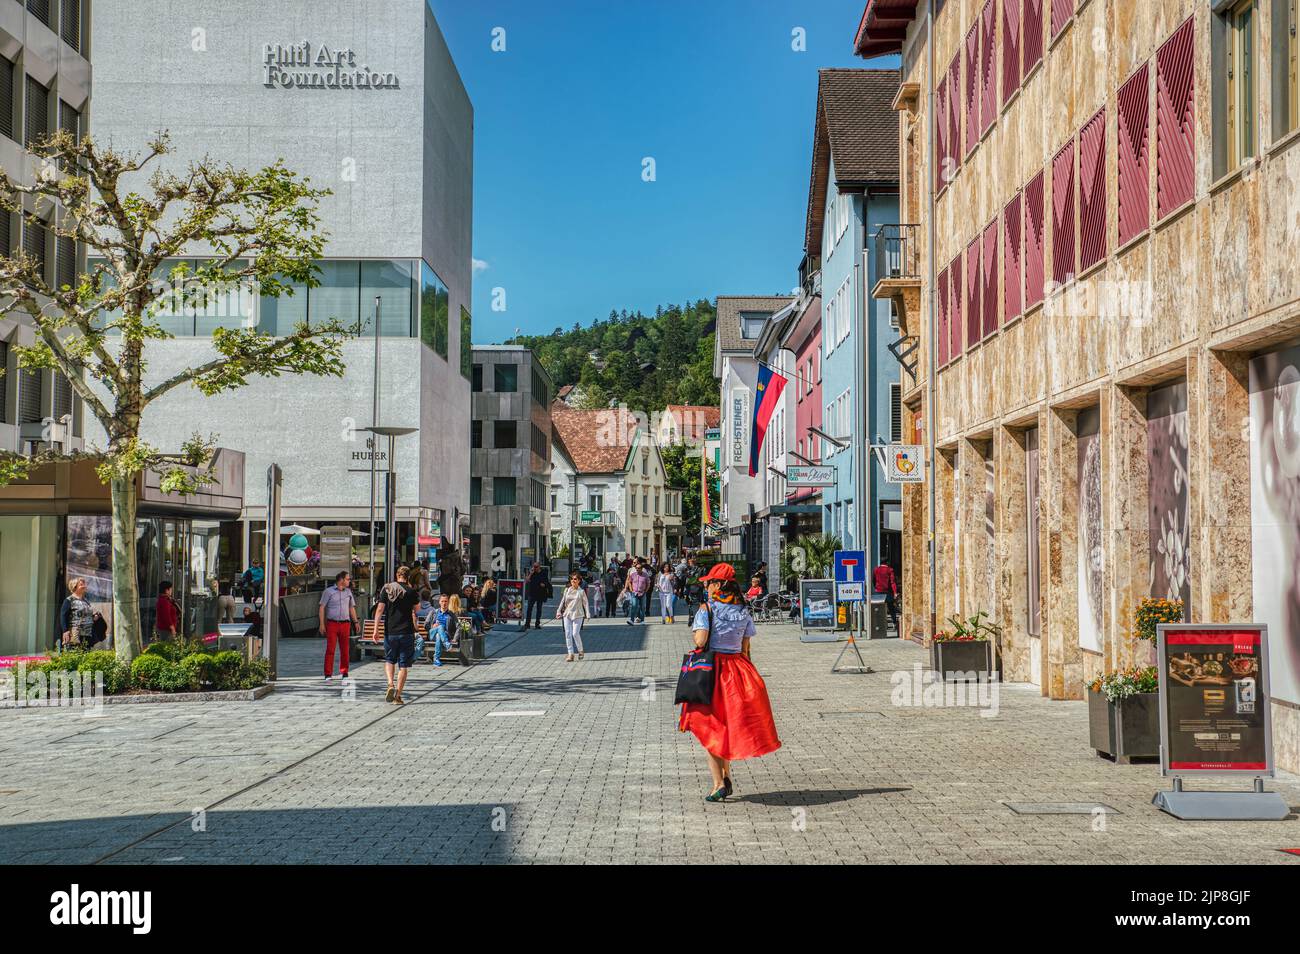 Vaduz main street (Stadtle) on a summer, sunny day. People walk outdoor in spring clothes by the Hilti Art Foundation in the city downtown district Stock Photo